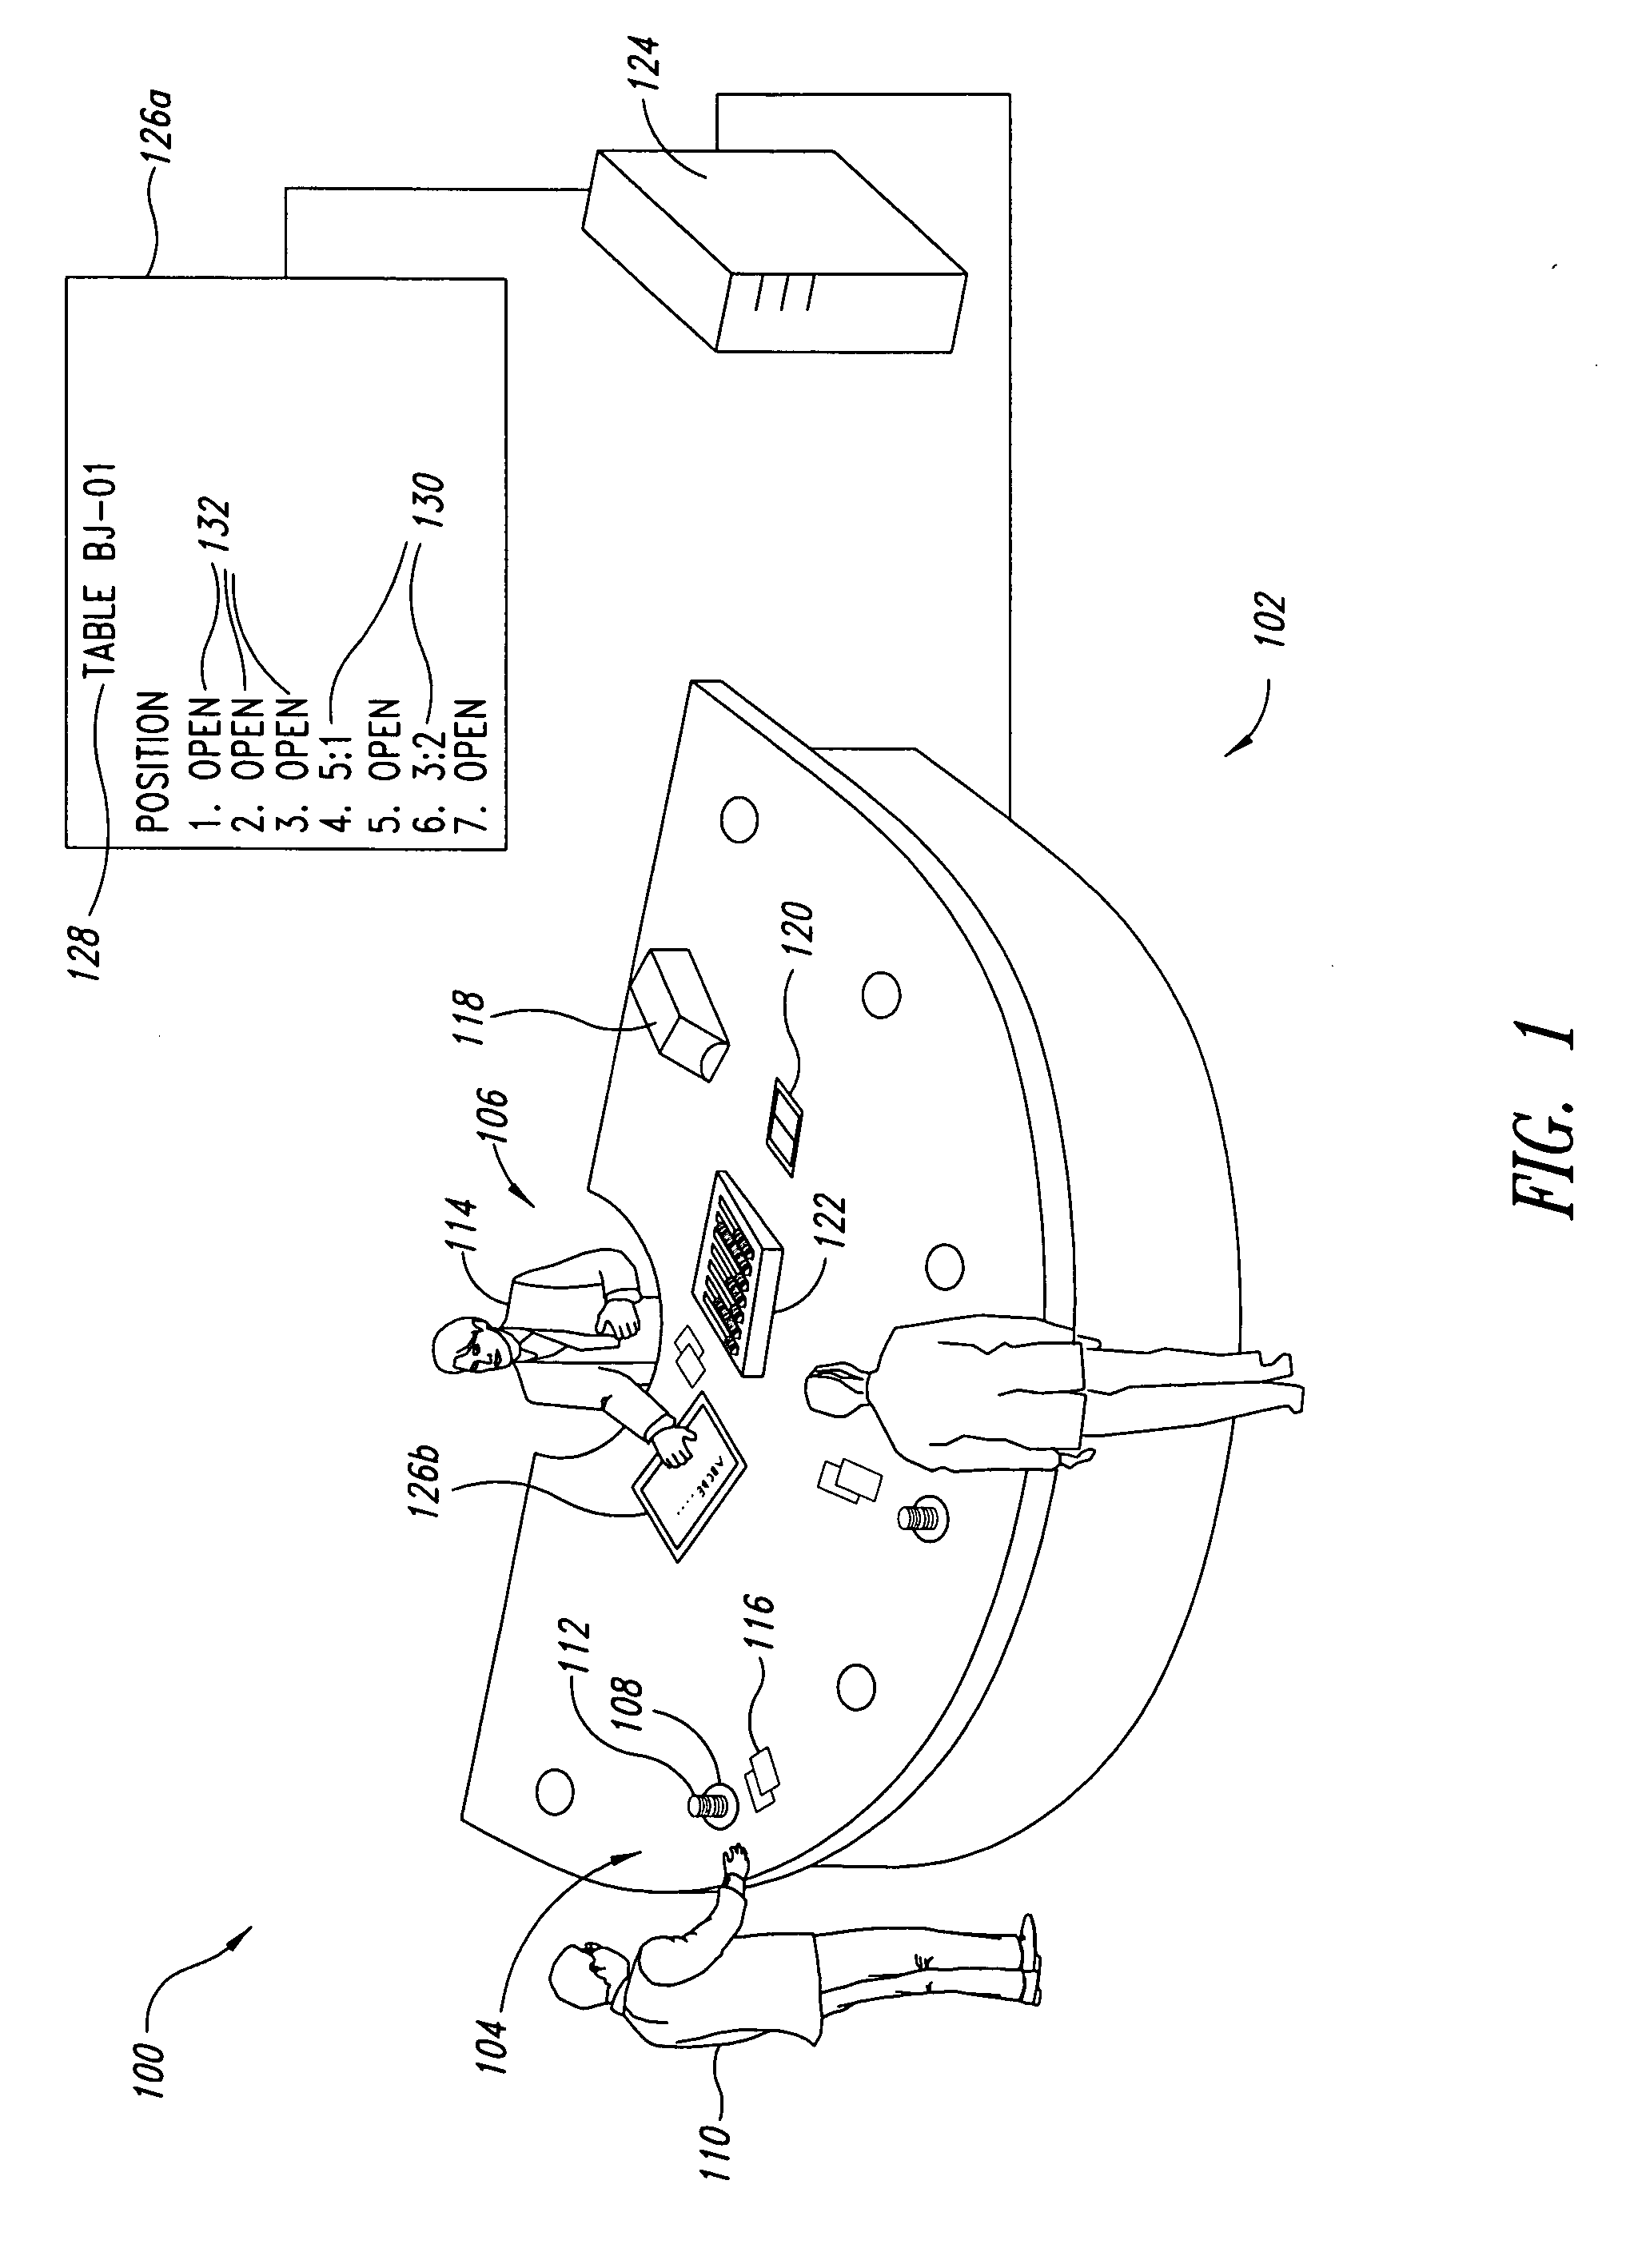 Systems, methods and articles to facilitate playing card games with intermediary playing card receiver